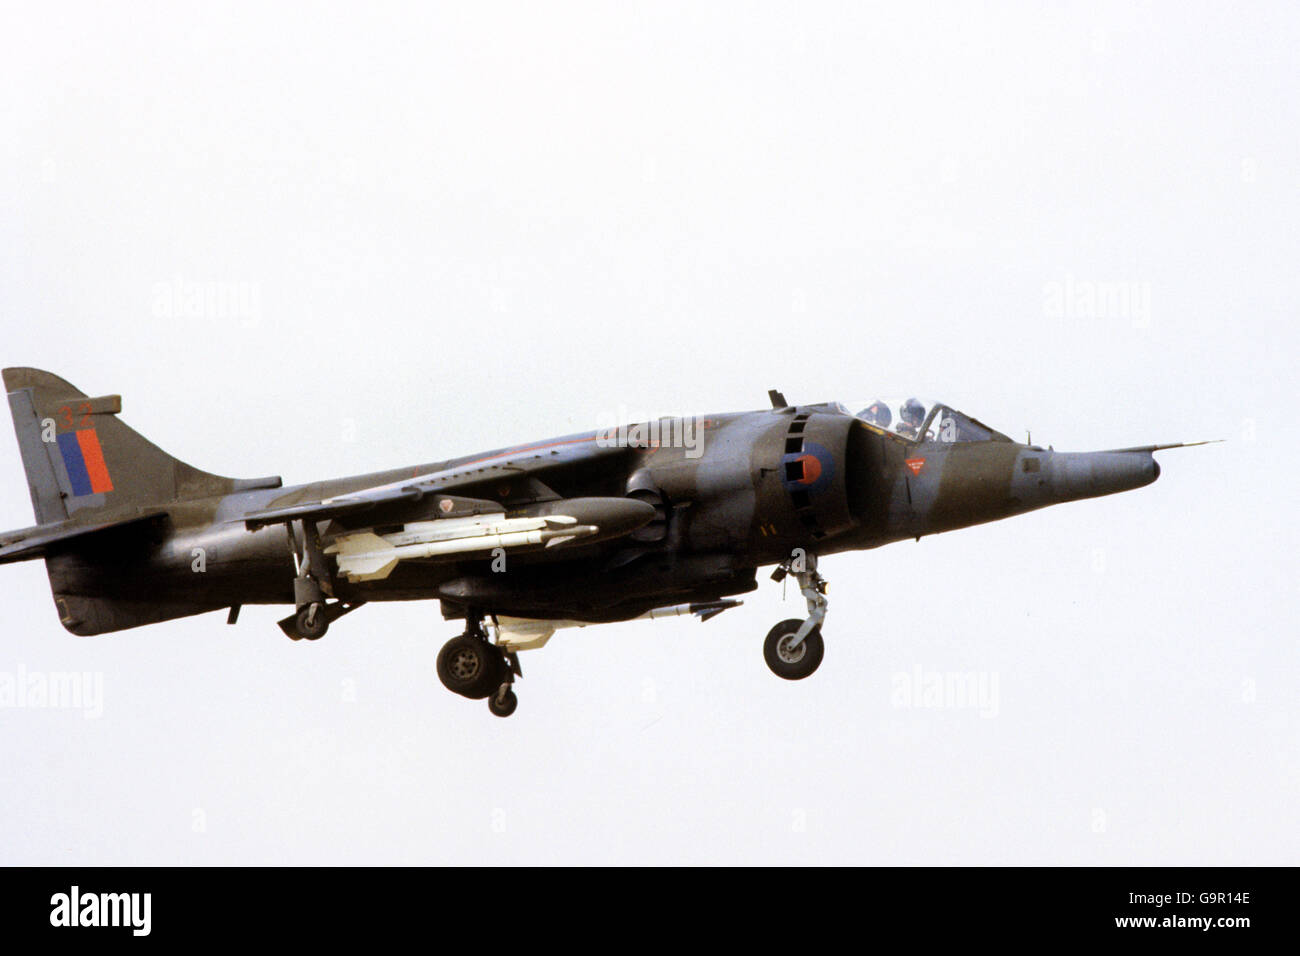 An RAF Harrier, modified to carry Sidewinder air-to-air missiles for possible use with the Falklands task force, in flight at RAF Wittering, Cambridgeshire. The RAF Harriers are to back-up the Navy's Sea Harriers. Stock Photo